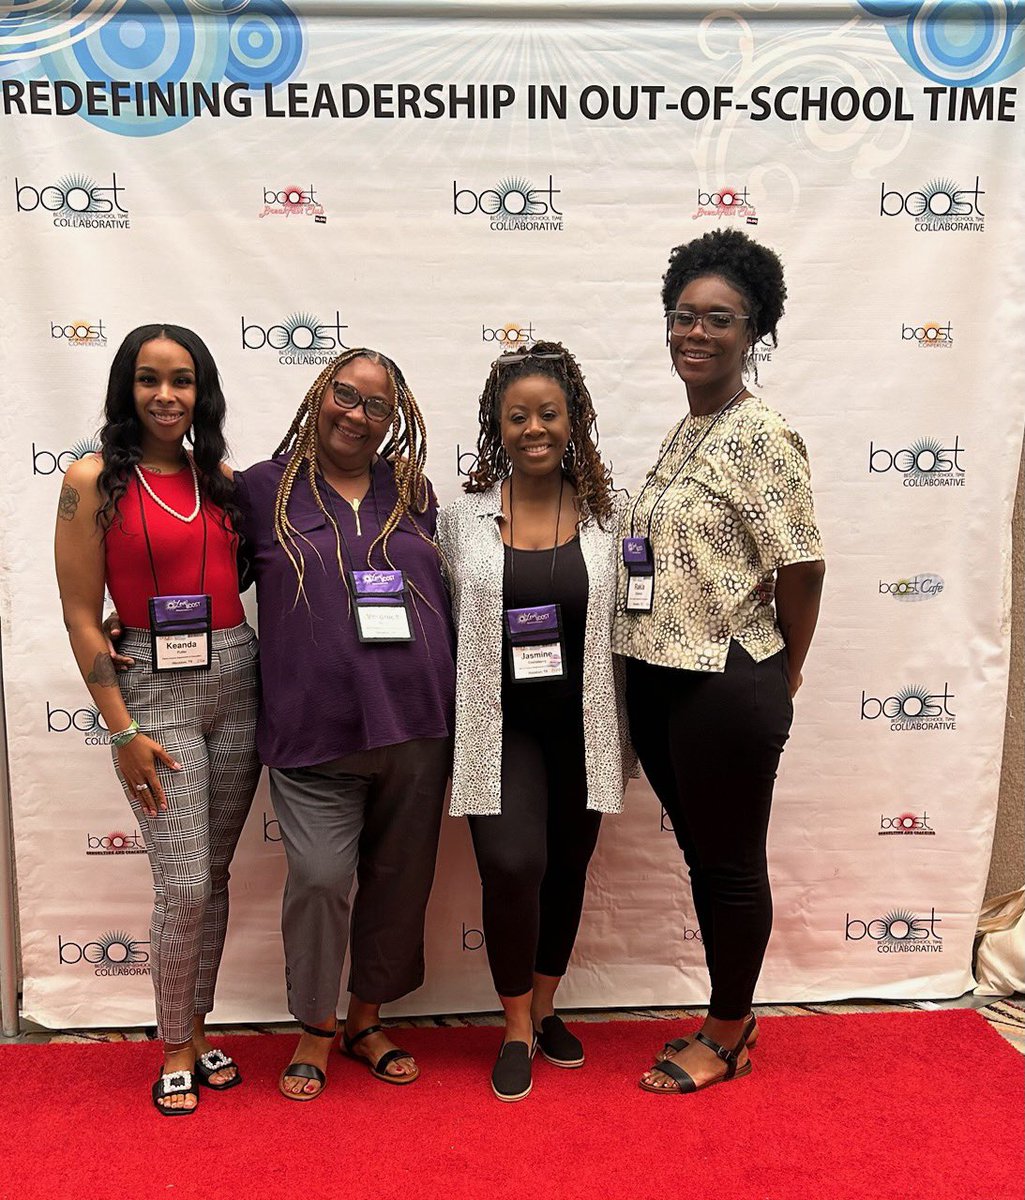 Our team having fun and learning on #MakingAfterschoolcool at #boostconference ! #OST #Afterschoolprofessionals